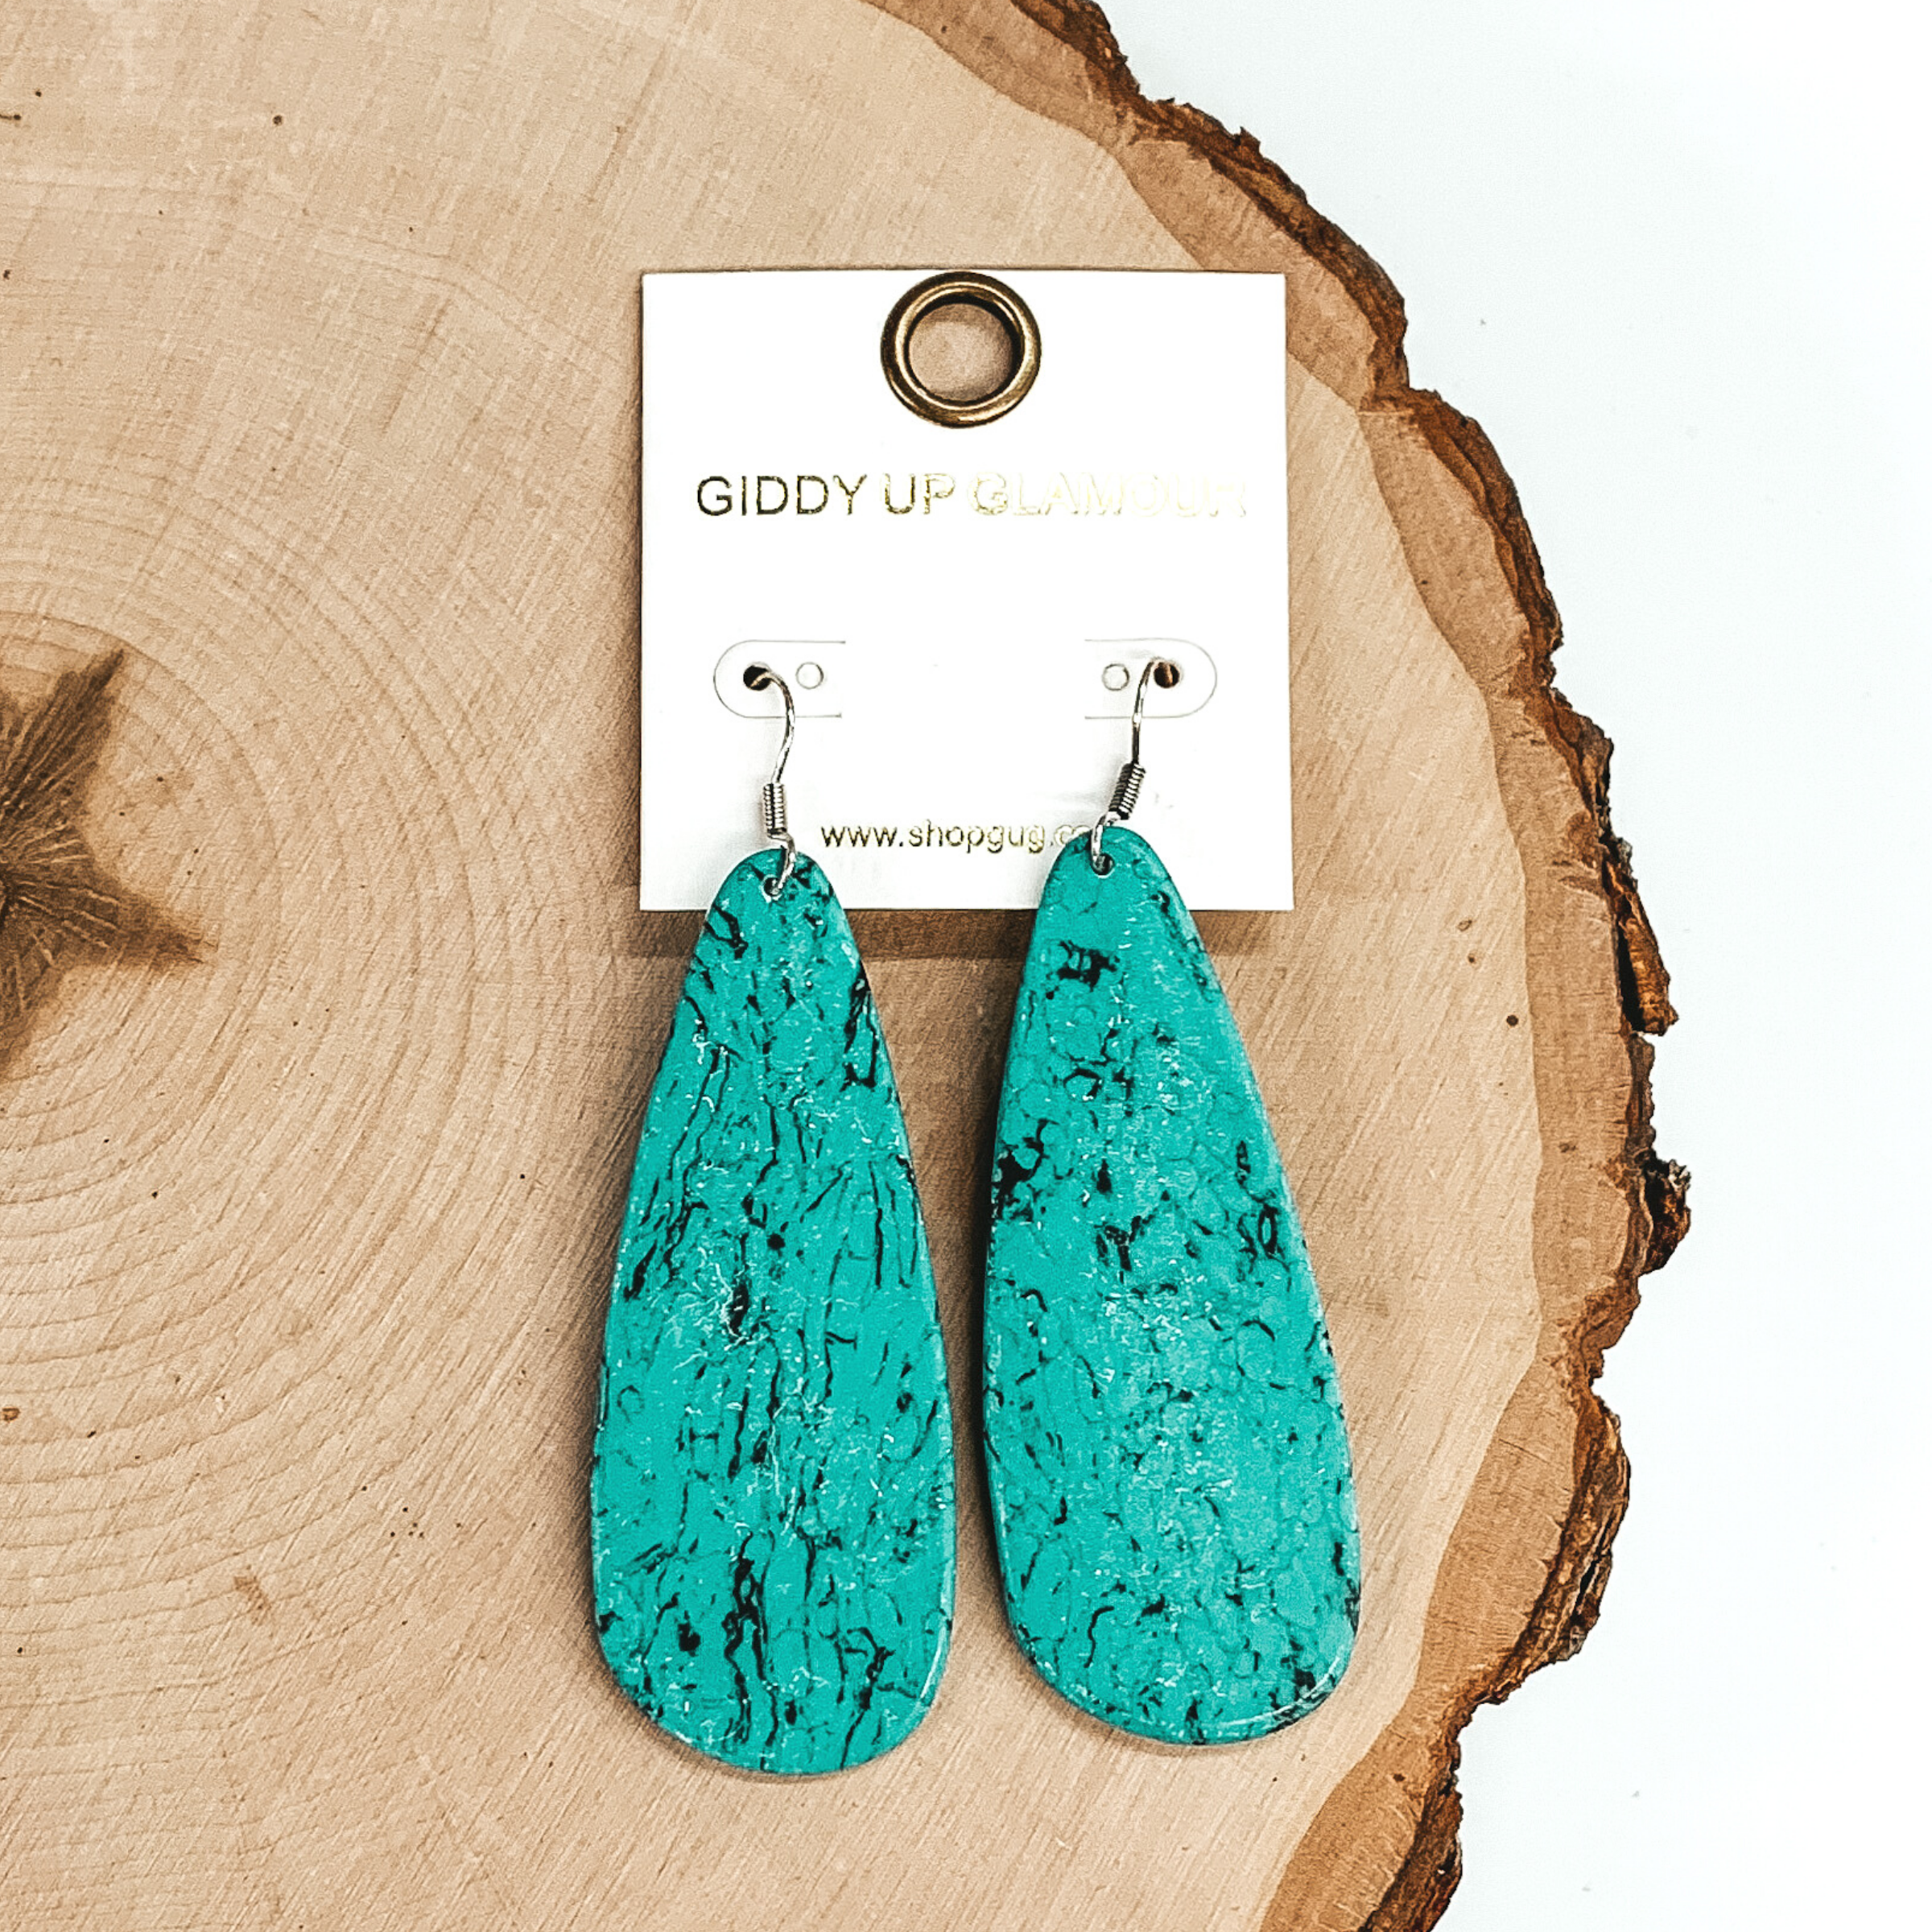 Teardrop shaped stone earrings. These dangle earrings have a marbled look and is in a turquoise color. These earrings are pictured laying on a piece of wood on a white background.